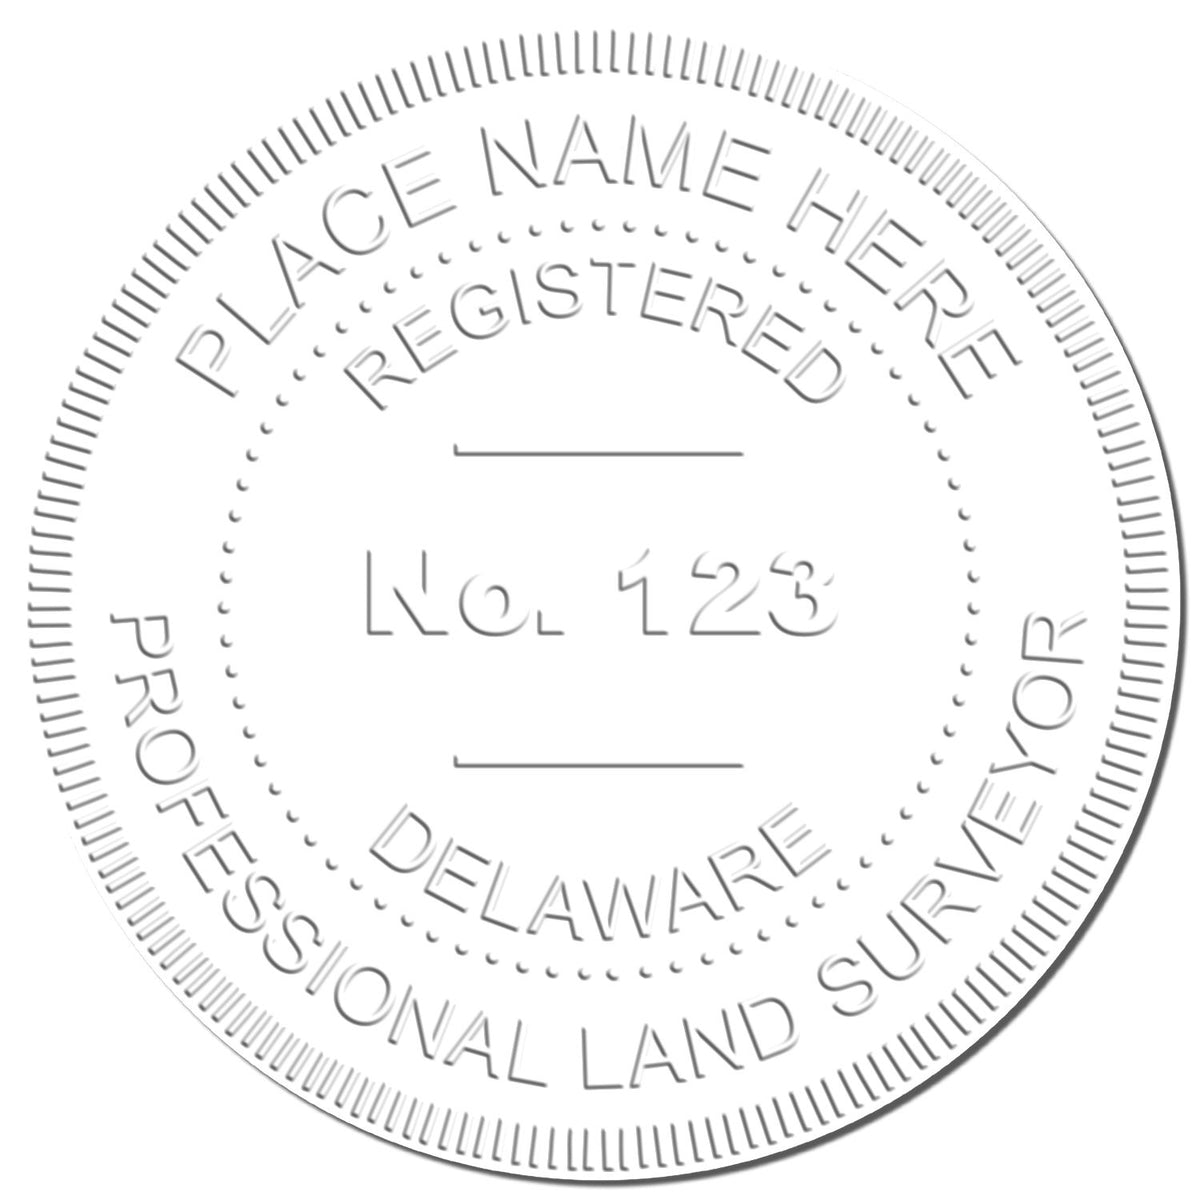 This paper is stamped with a sample imprint of the Hybrid Delaware Land Surveyor Seal, signifying its quality and reliability.